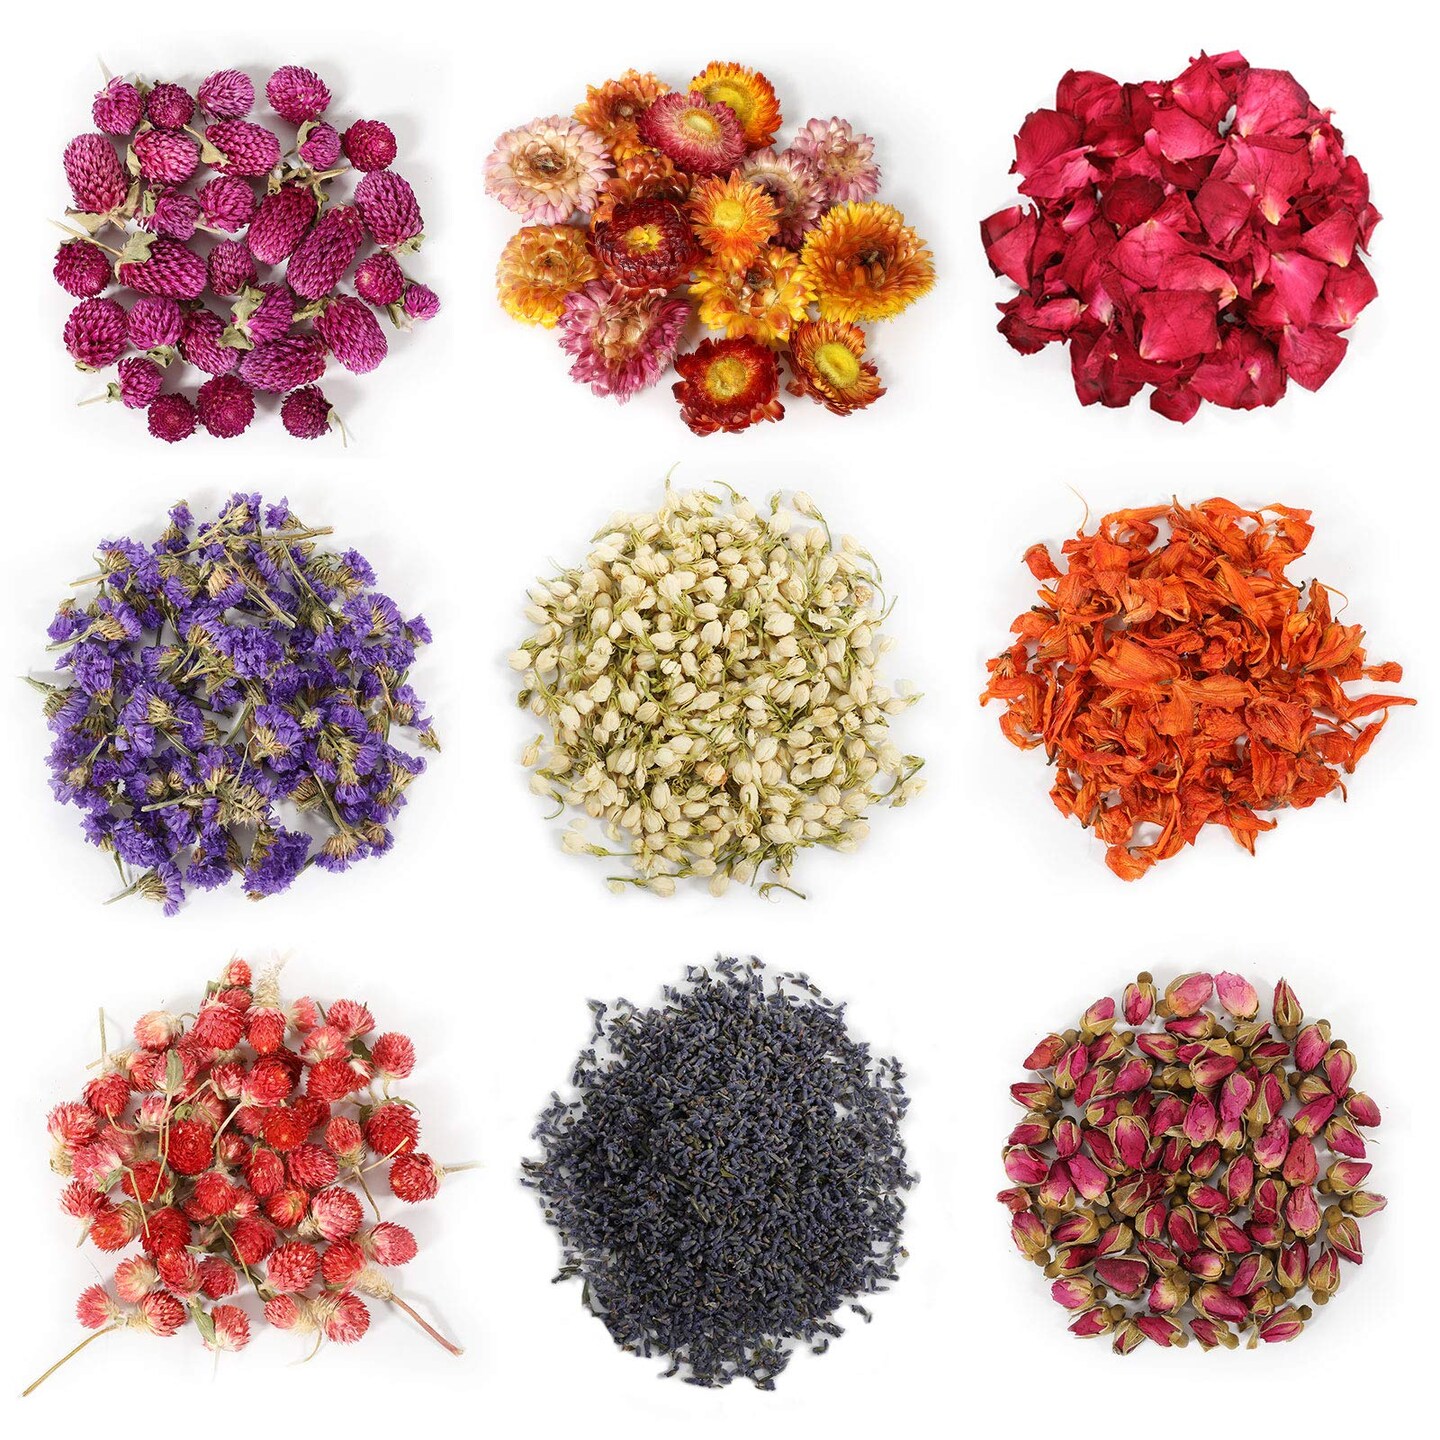 9 Bags Dried Flowers,100% Natural Dried Flowers Herbs Kit for Soap Making, DIY Candle Making,Bath - Include Rose Petals,Lavender,Don&#x27;t Forget Me,Lilium,Jasmine,Rosebudsand More